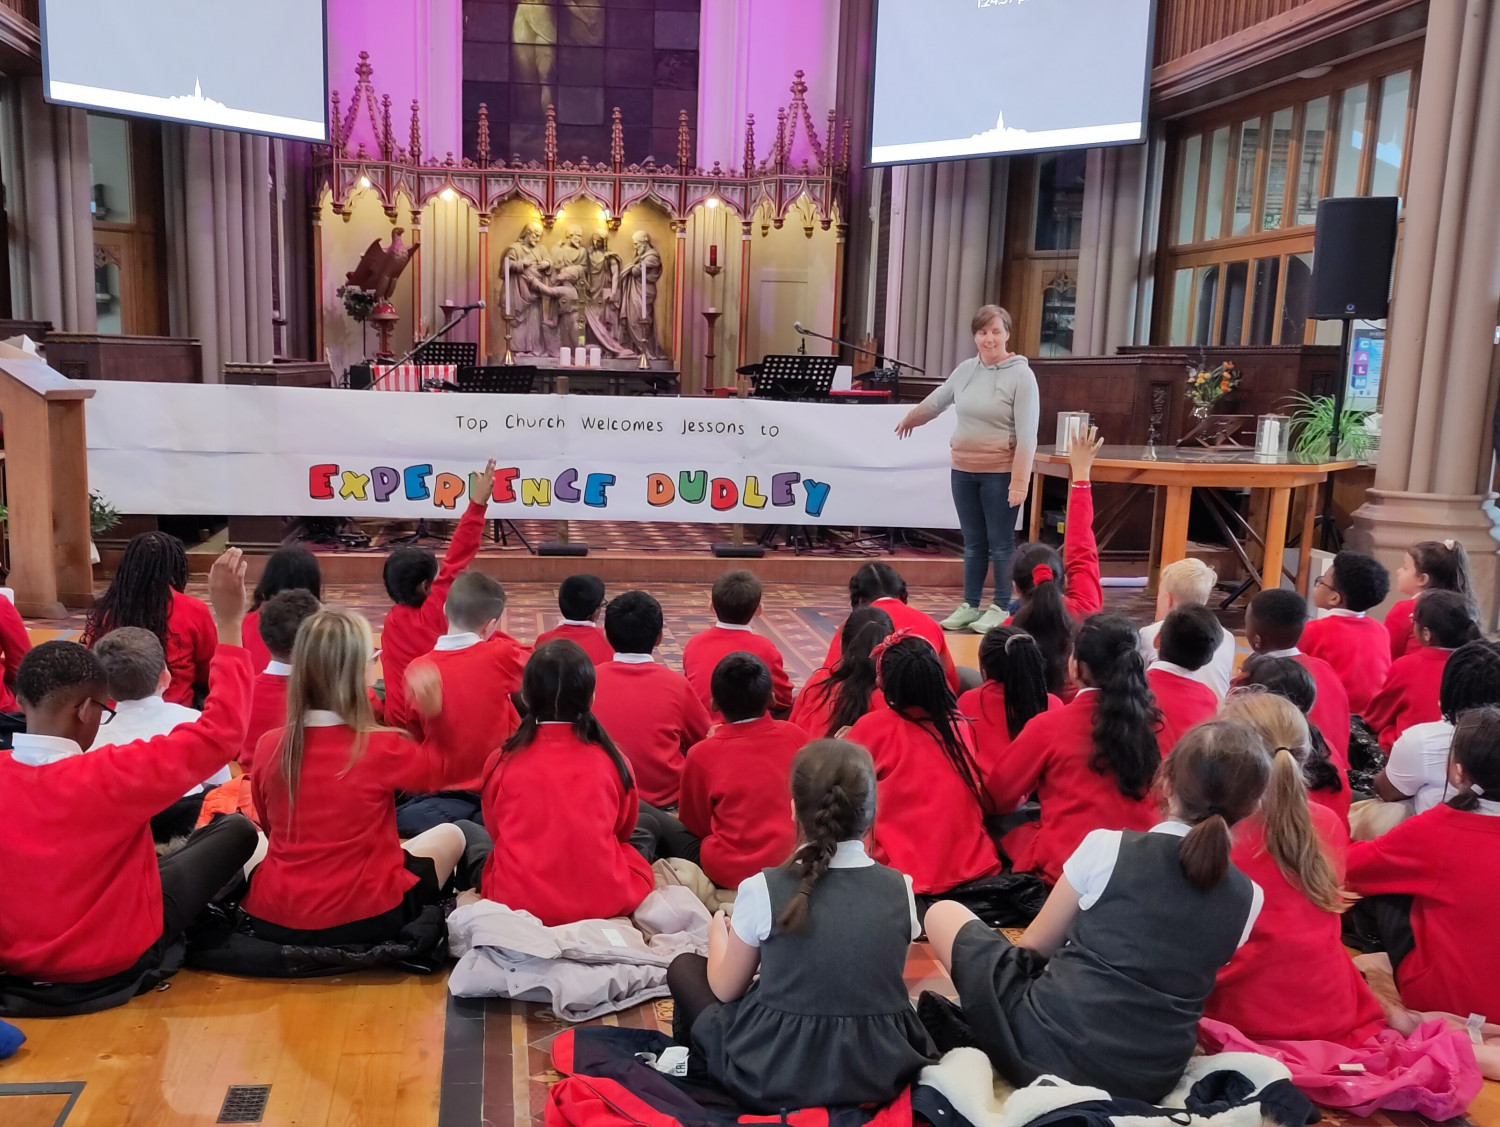 Children at Experience Dudley in Top Church